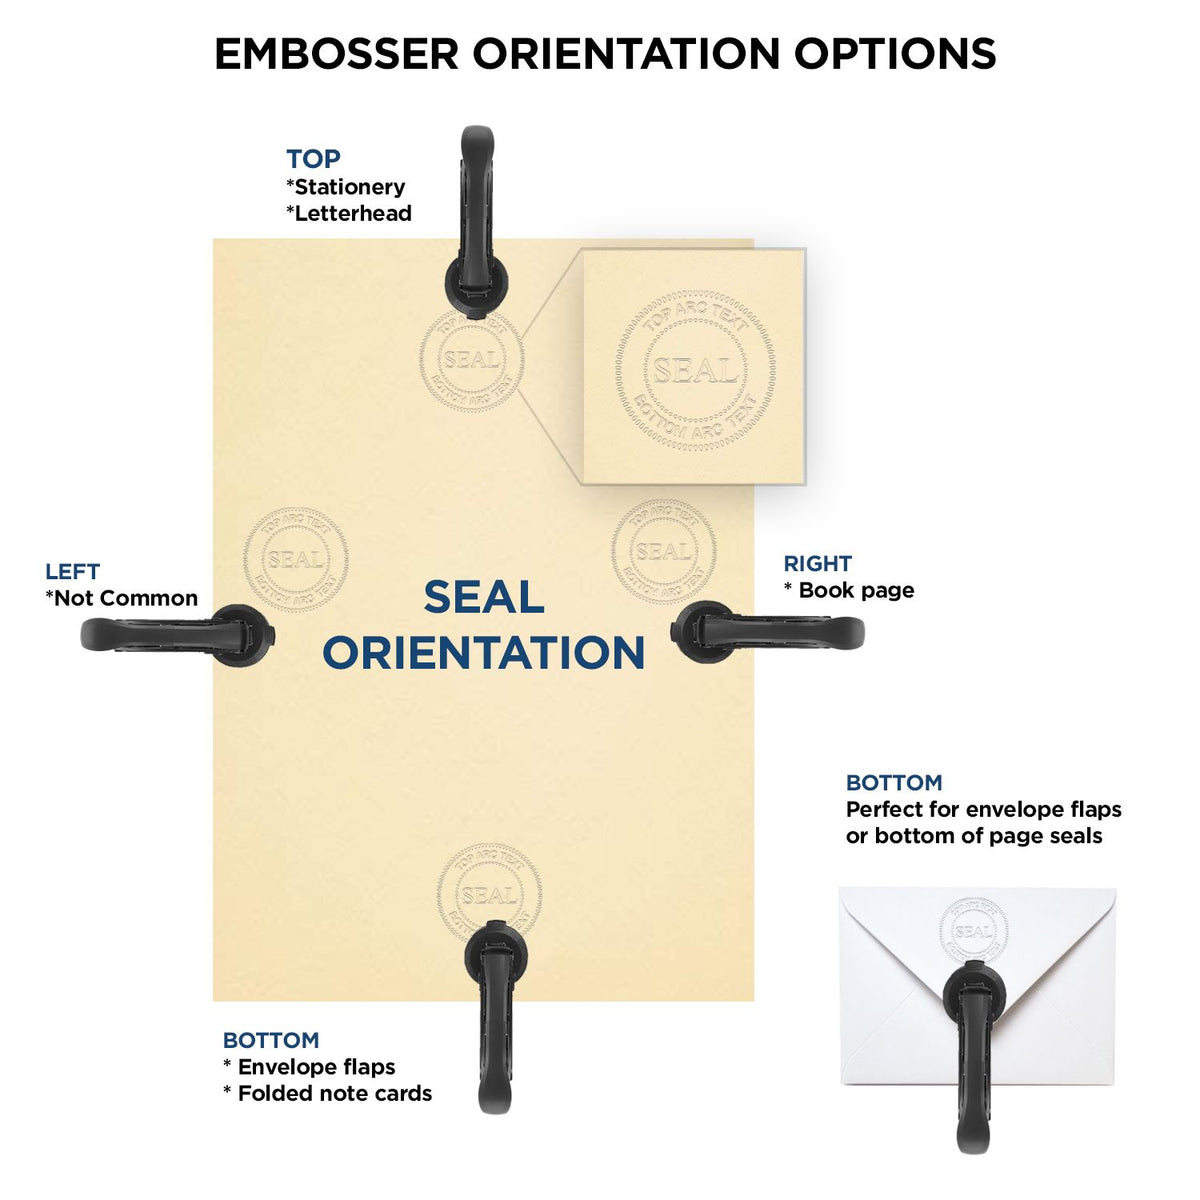 An infographic for the State of Washington Long Reach Architectural Embossing Seal showing embosser orientation, this is showing examples of a top, bottom, right and left insert.